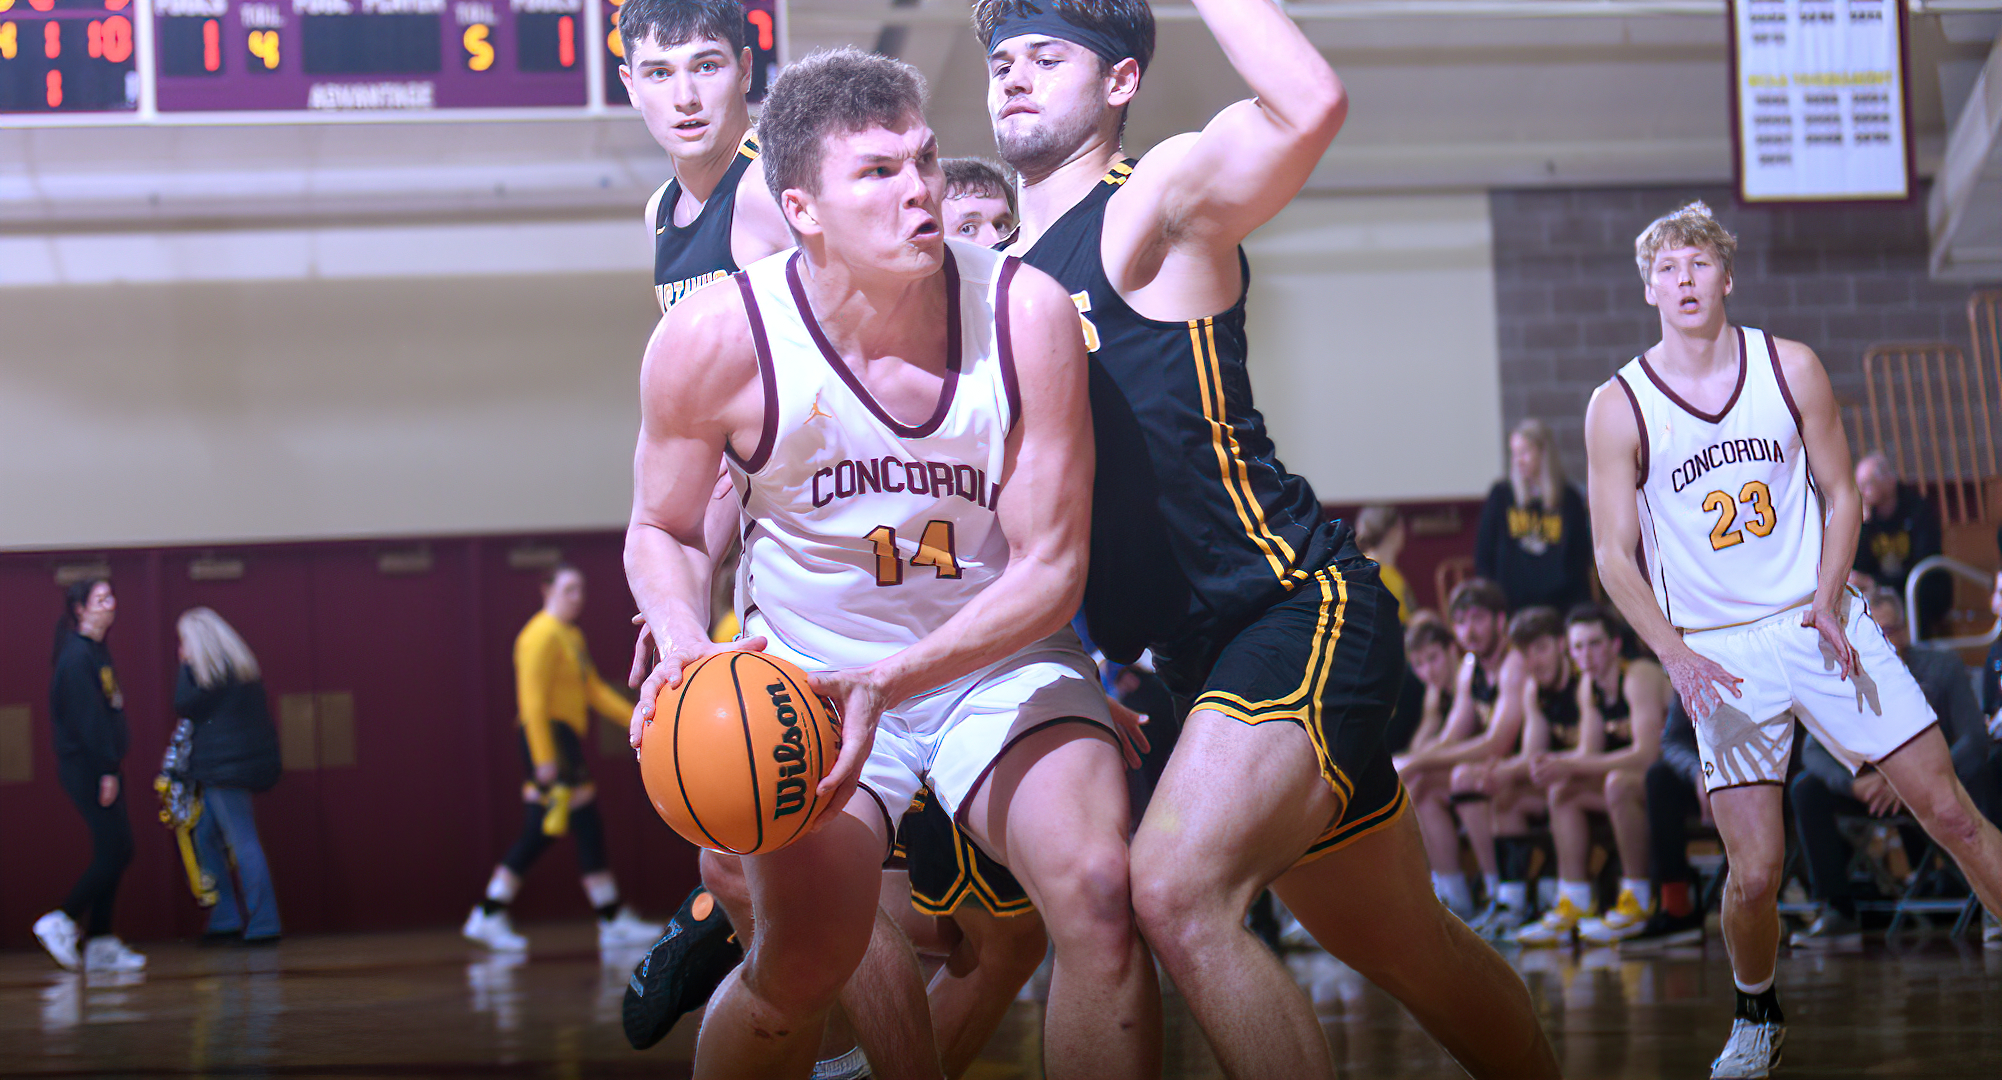 Rowan Nelson scored 11 of his team-high 18 points in the second half in the Cobbers' game against UW-Platteville. He also added a team-high four boards.